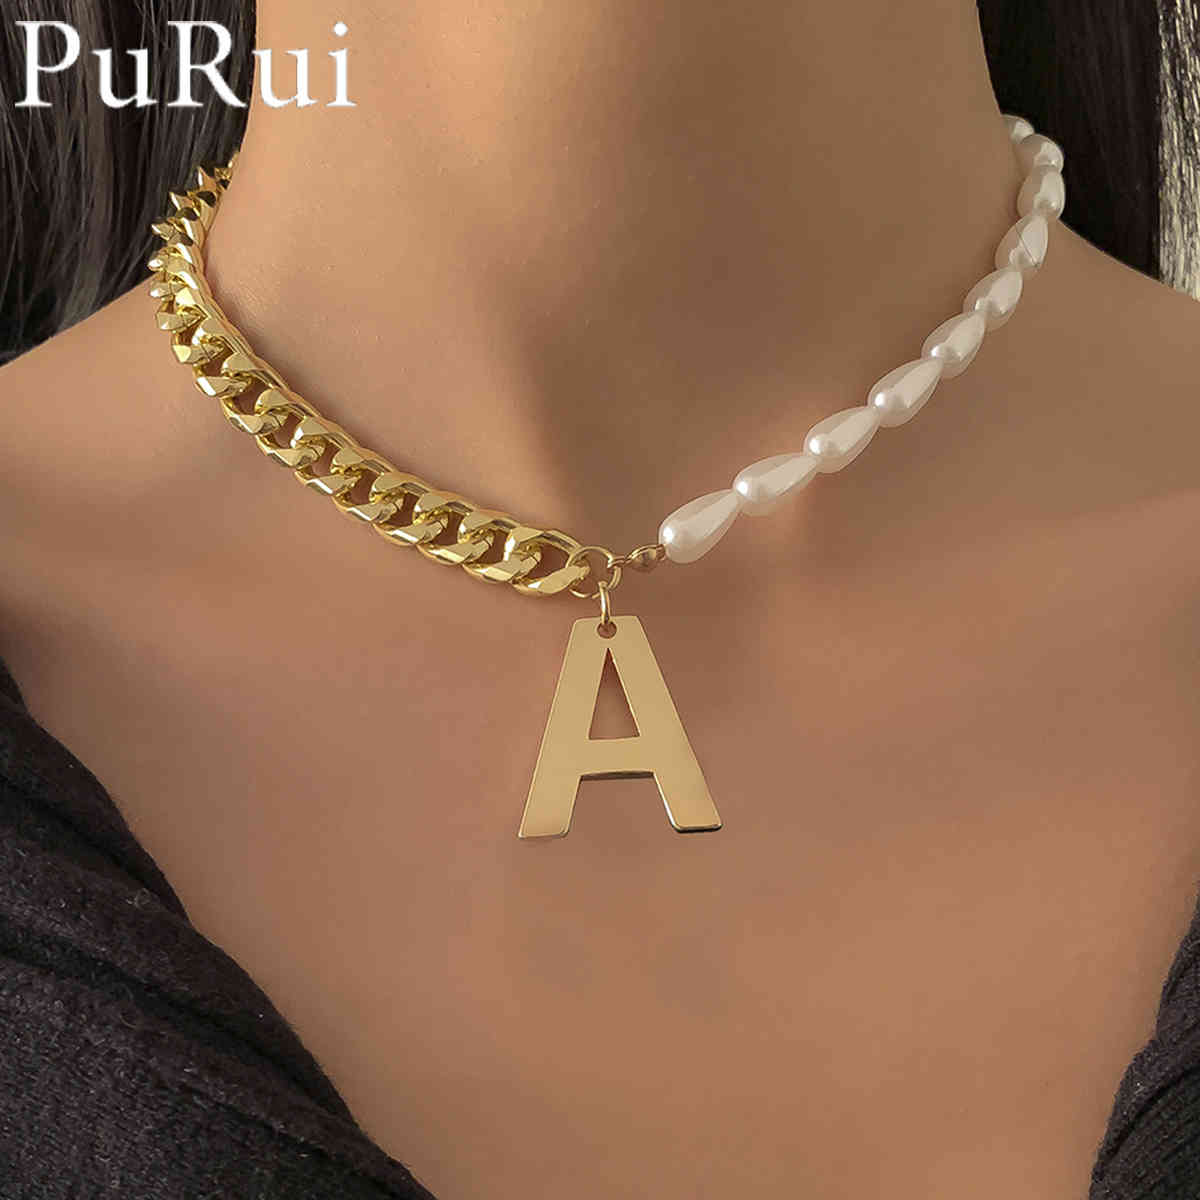 

Simulated Necklace for Women 2021 Statement English Alphabet Initial Letter Pendants Choker Neckalce Baroque Pearl Jewelry